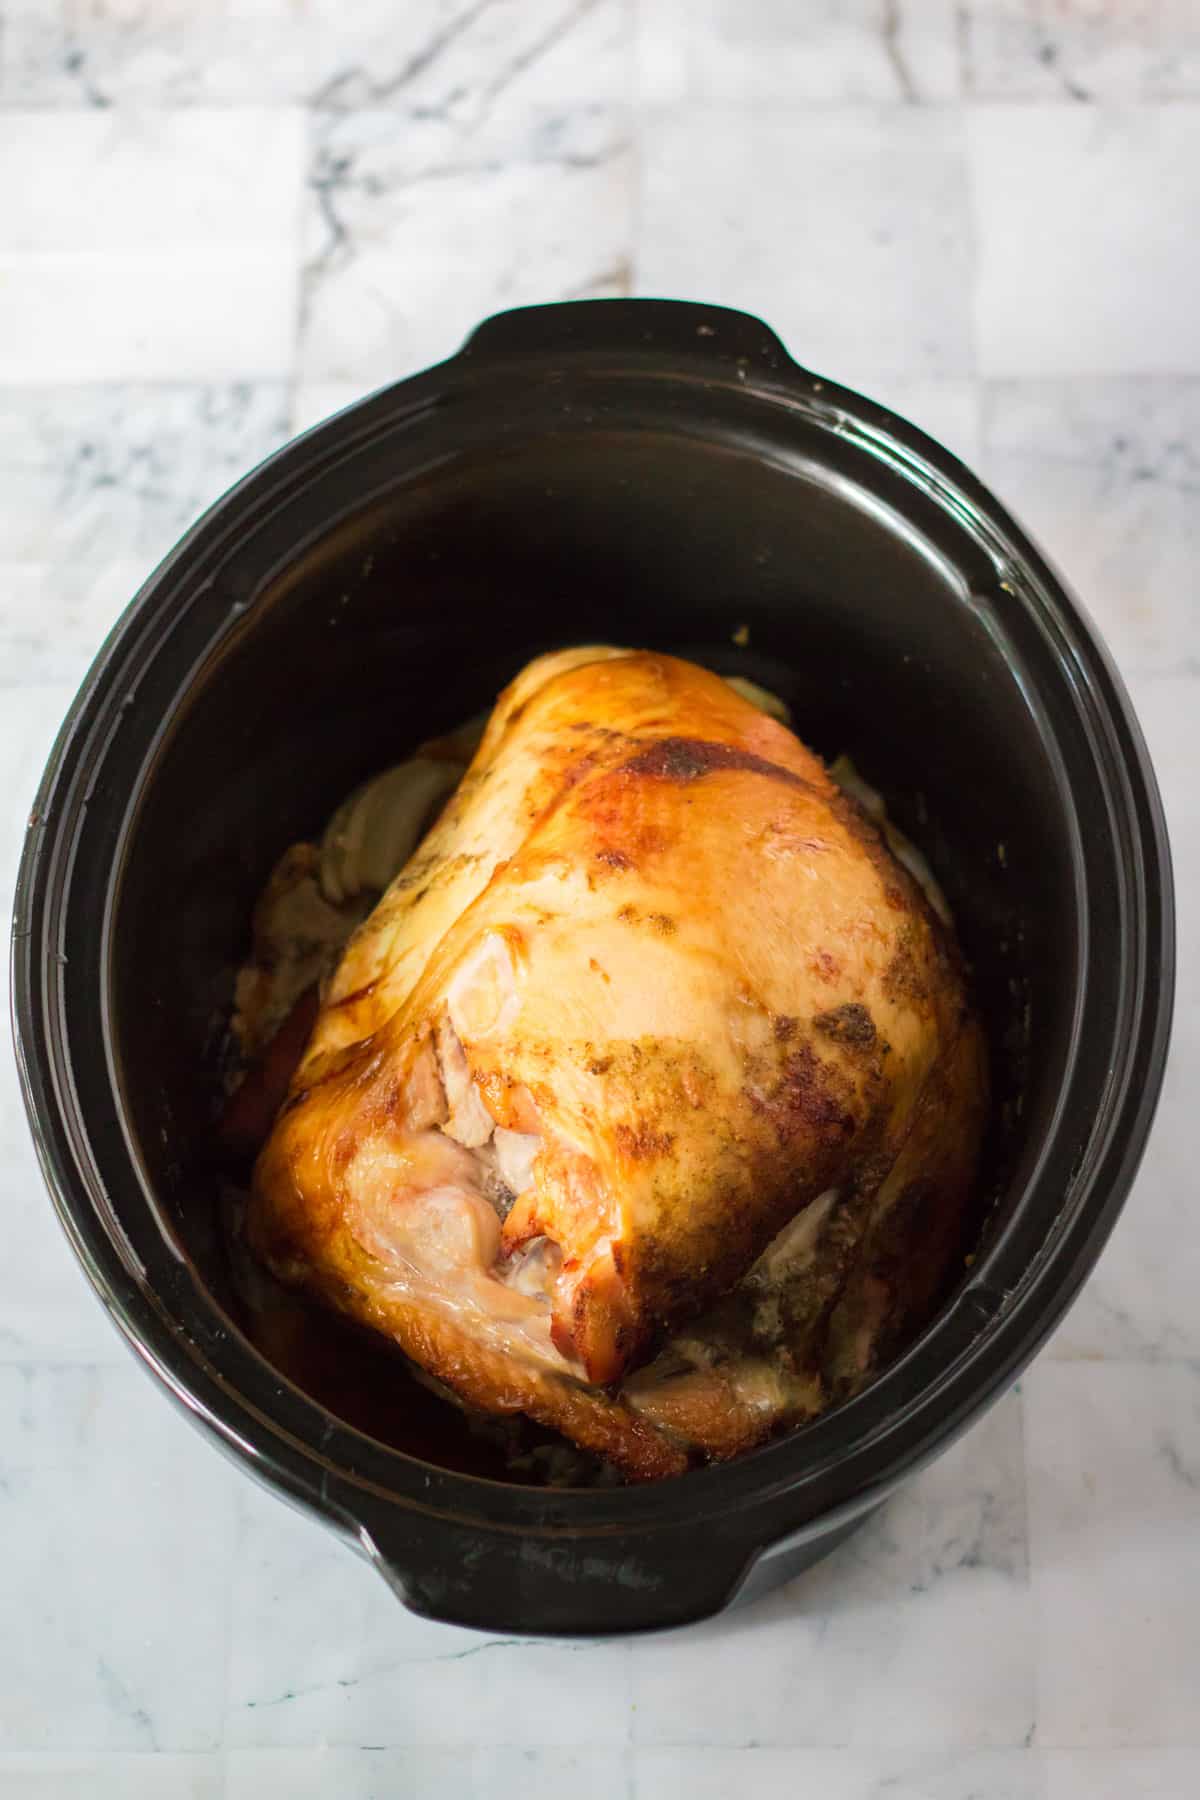 Freshly cooked Slow Cooker Turkey Breast with Vegetables